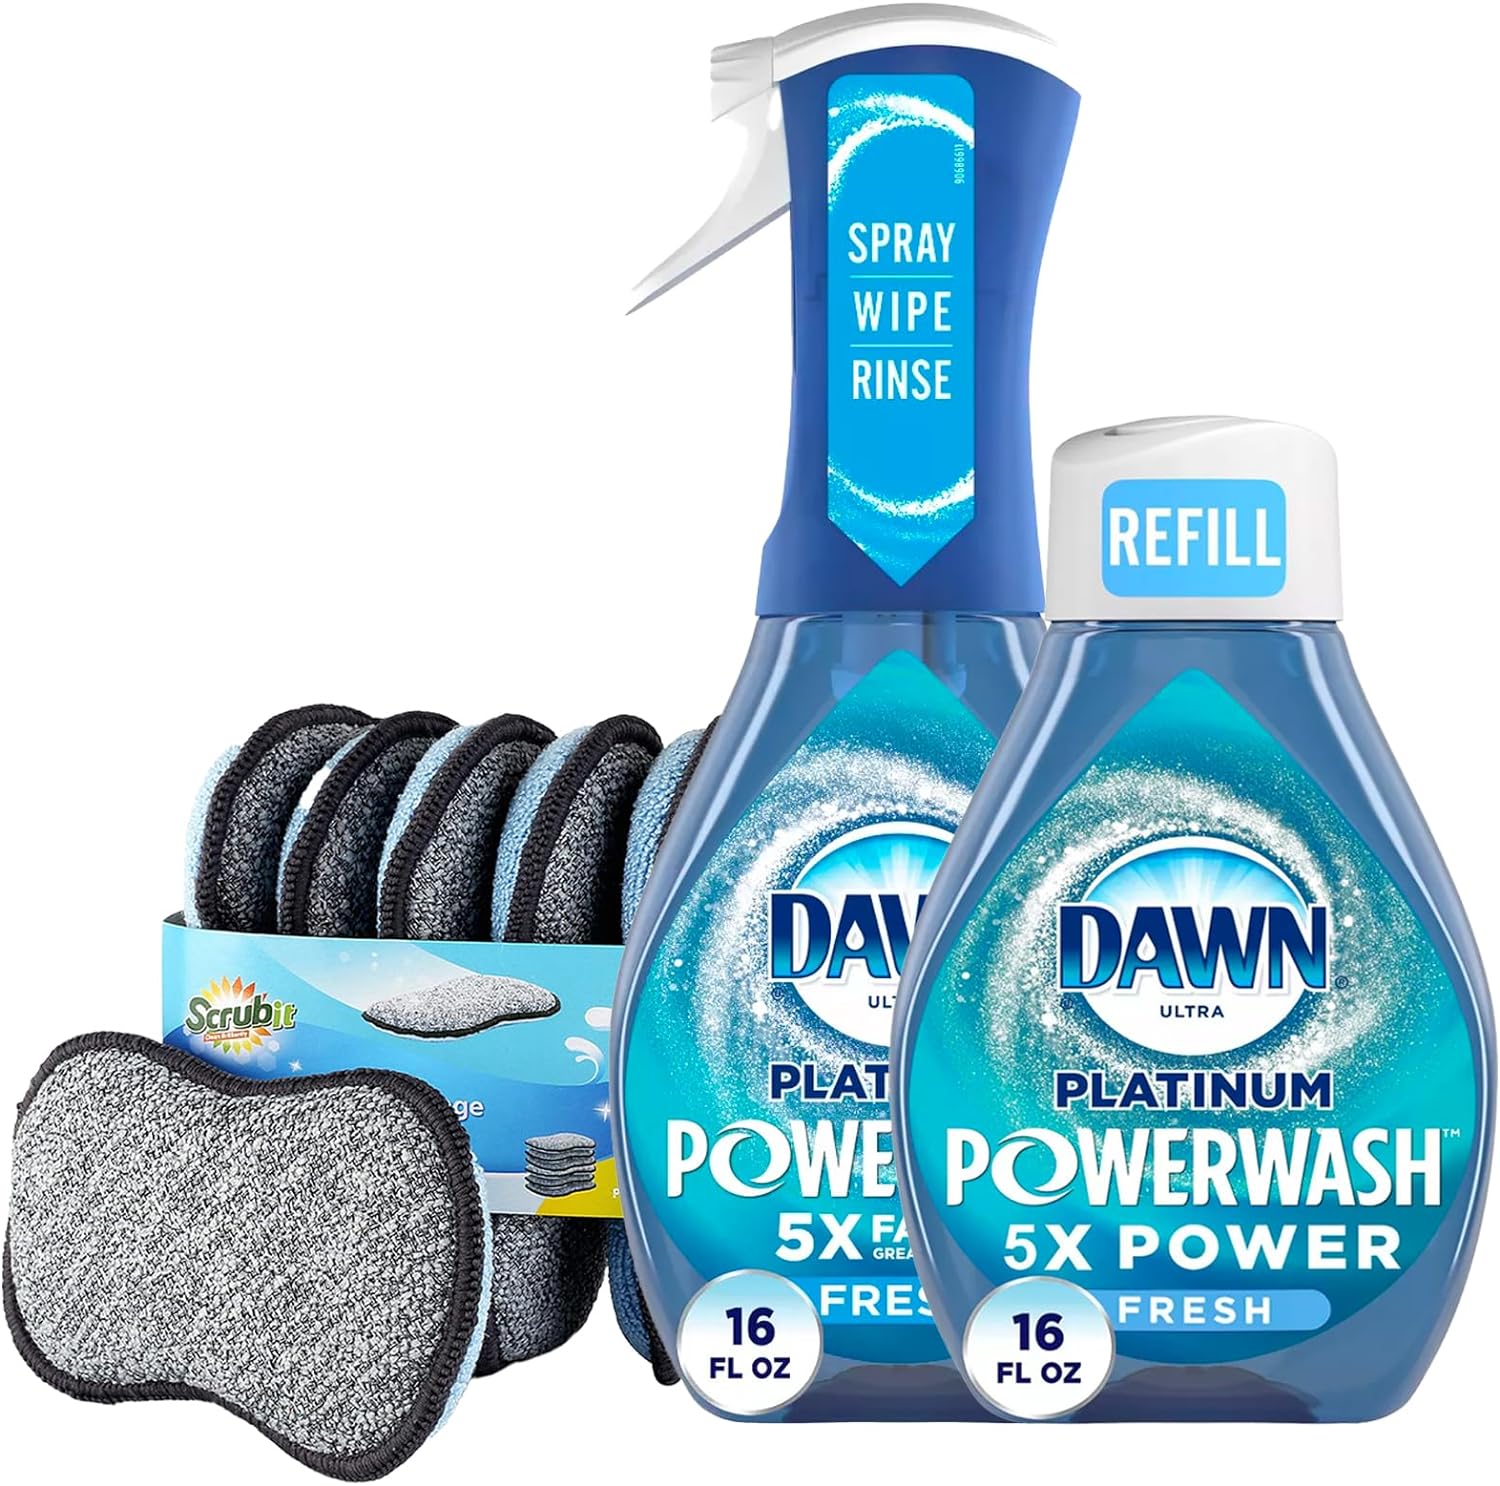 Dawn Powerwash Spray Platinum Dish Soap - Fresh Scent + 1 Dawn Powerwash Refill, 16 fl oz each With 6 Multi-Purpose Scrub Sponges for Cleaning Dishes, Pots and Pans